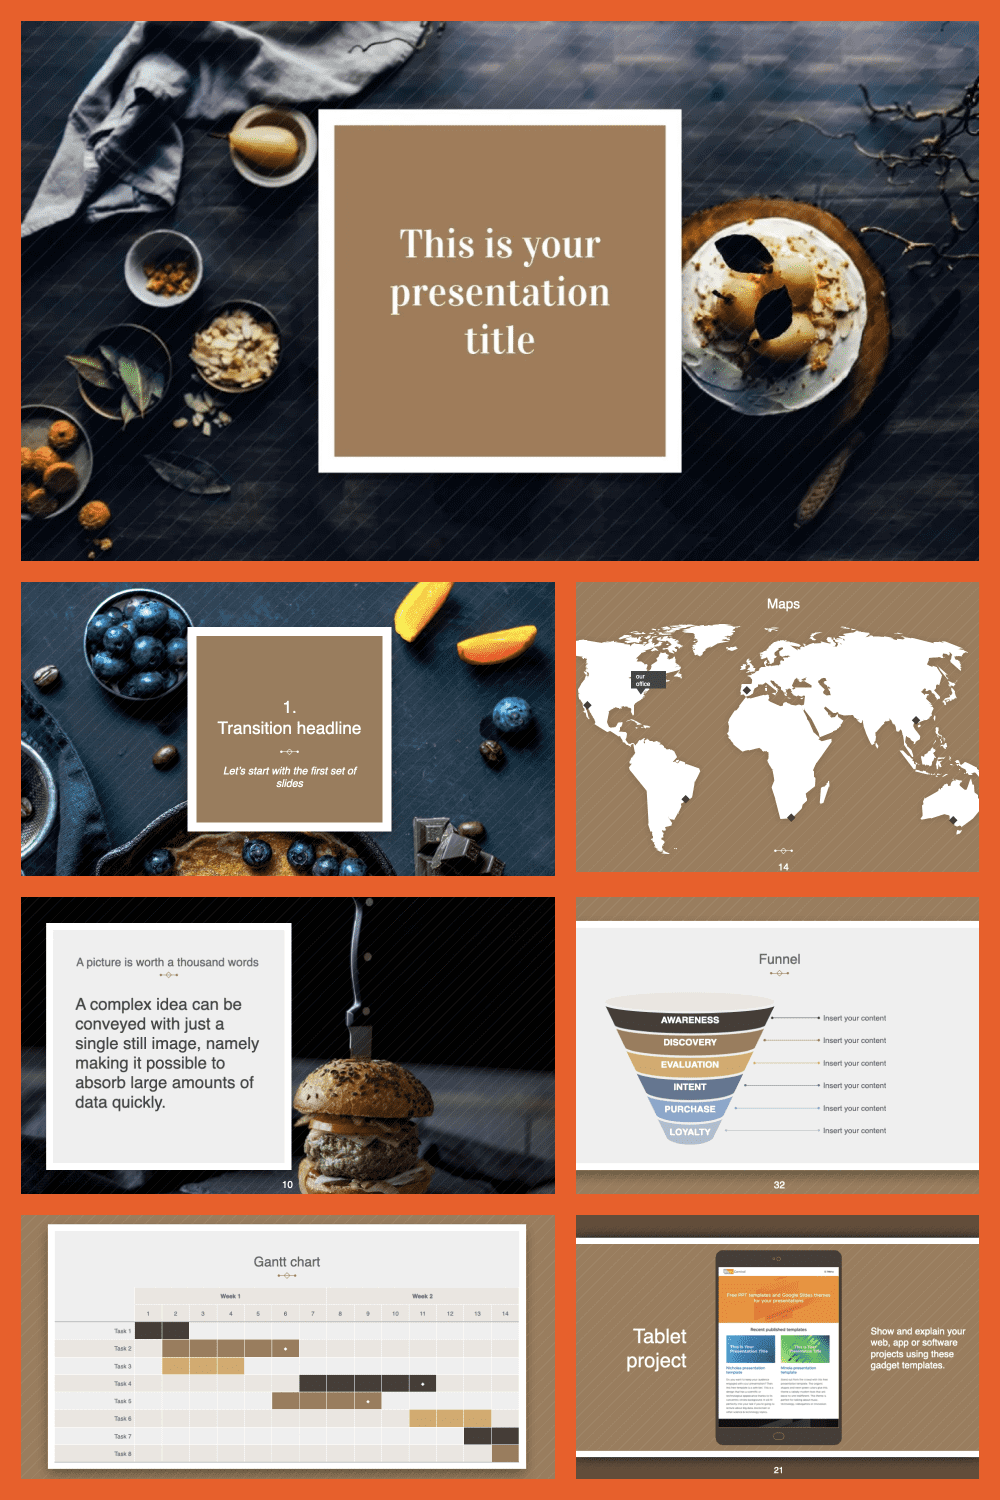 If you’re looking for an elegant Powerpoint template or Google Slides theme, with a classy design and calm color palette, then this one is a perfect choice.